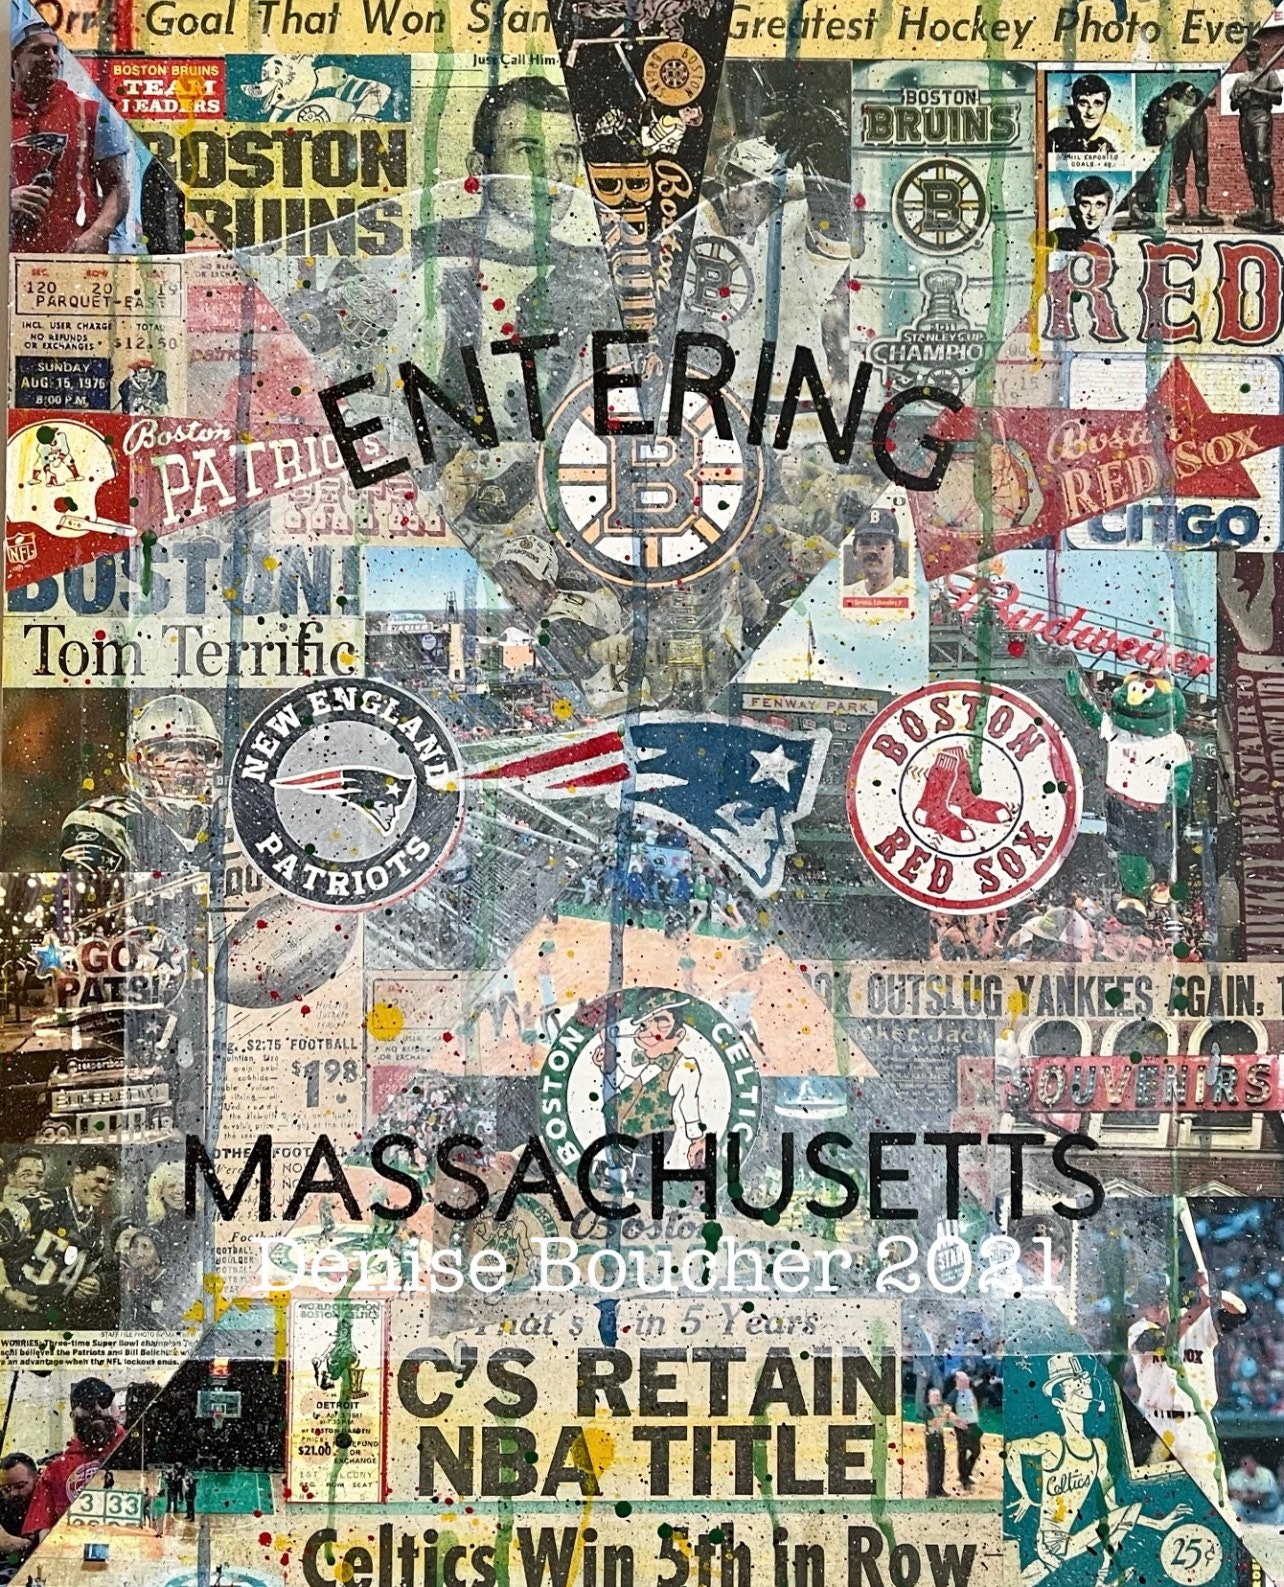 Boston Sports Teams In Front 2 Of Skyline Poster, New England Patriots,  Boston Celtics, Bruins, Red Sox Man Cave, Gift